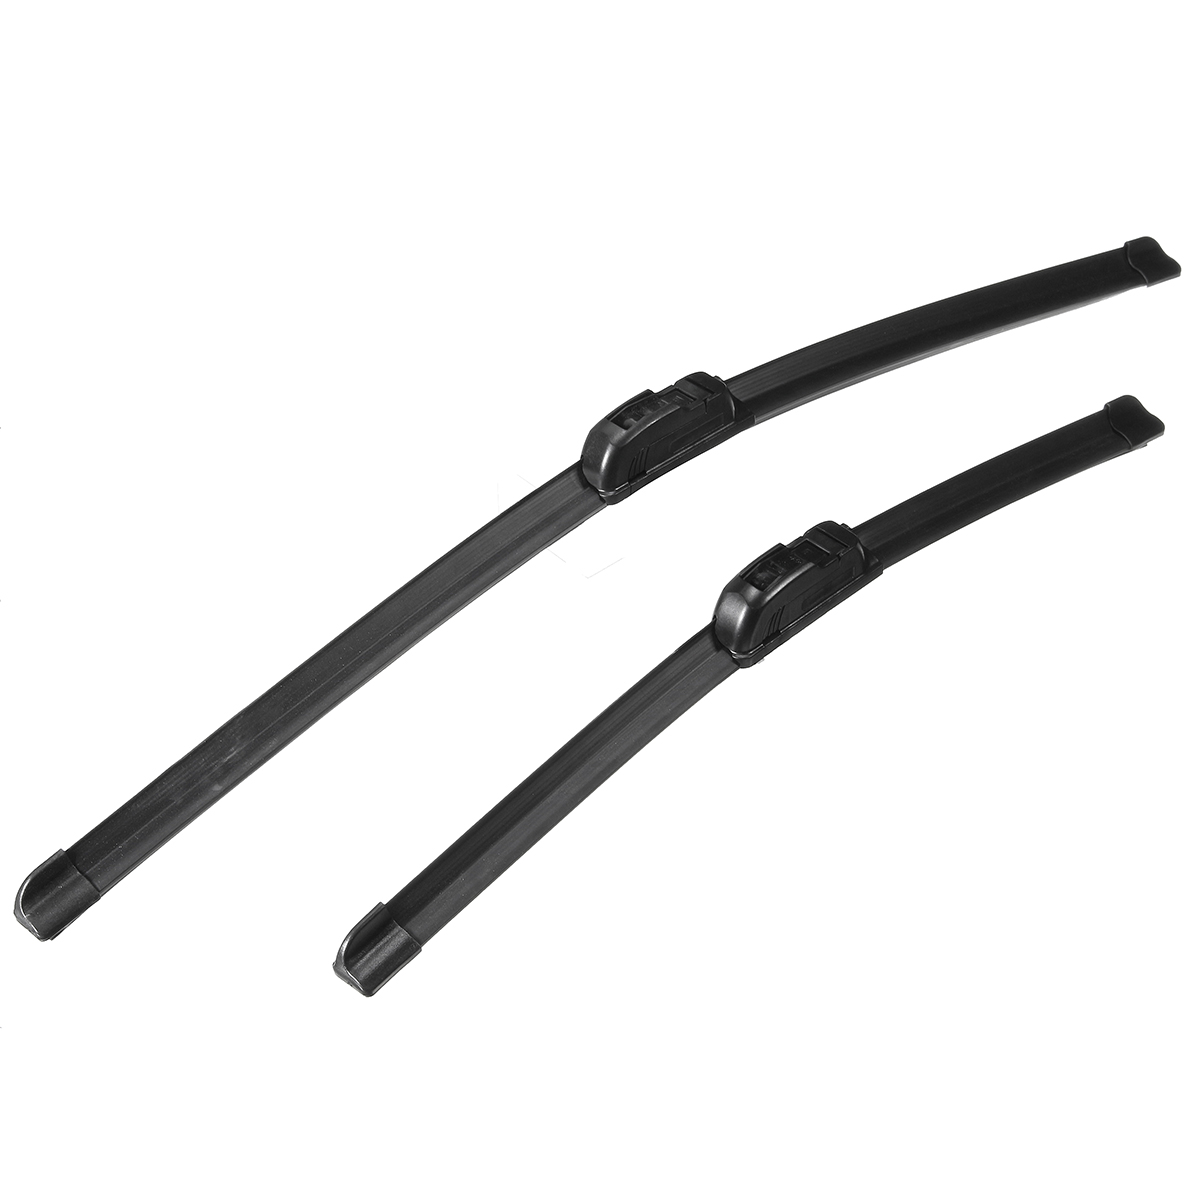 3PCSSet-FrontRear-Windscreen-Wiper-Blades-Right-Driver-For-Ford-Fiesta-02-07-1132331